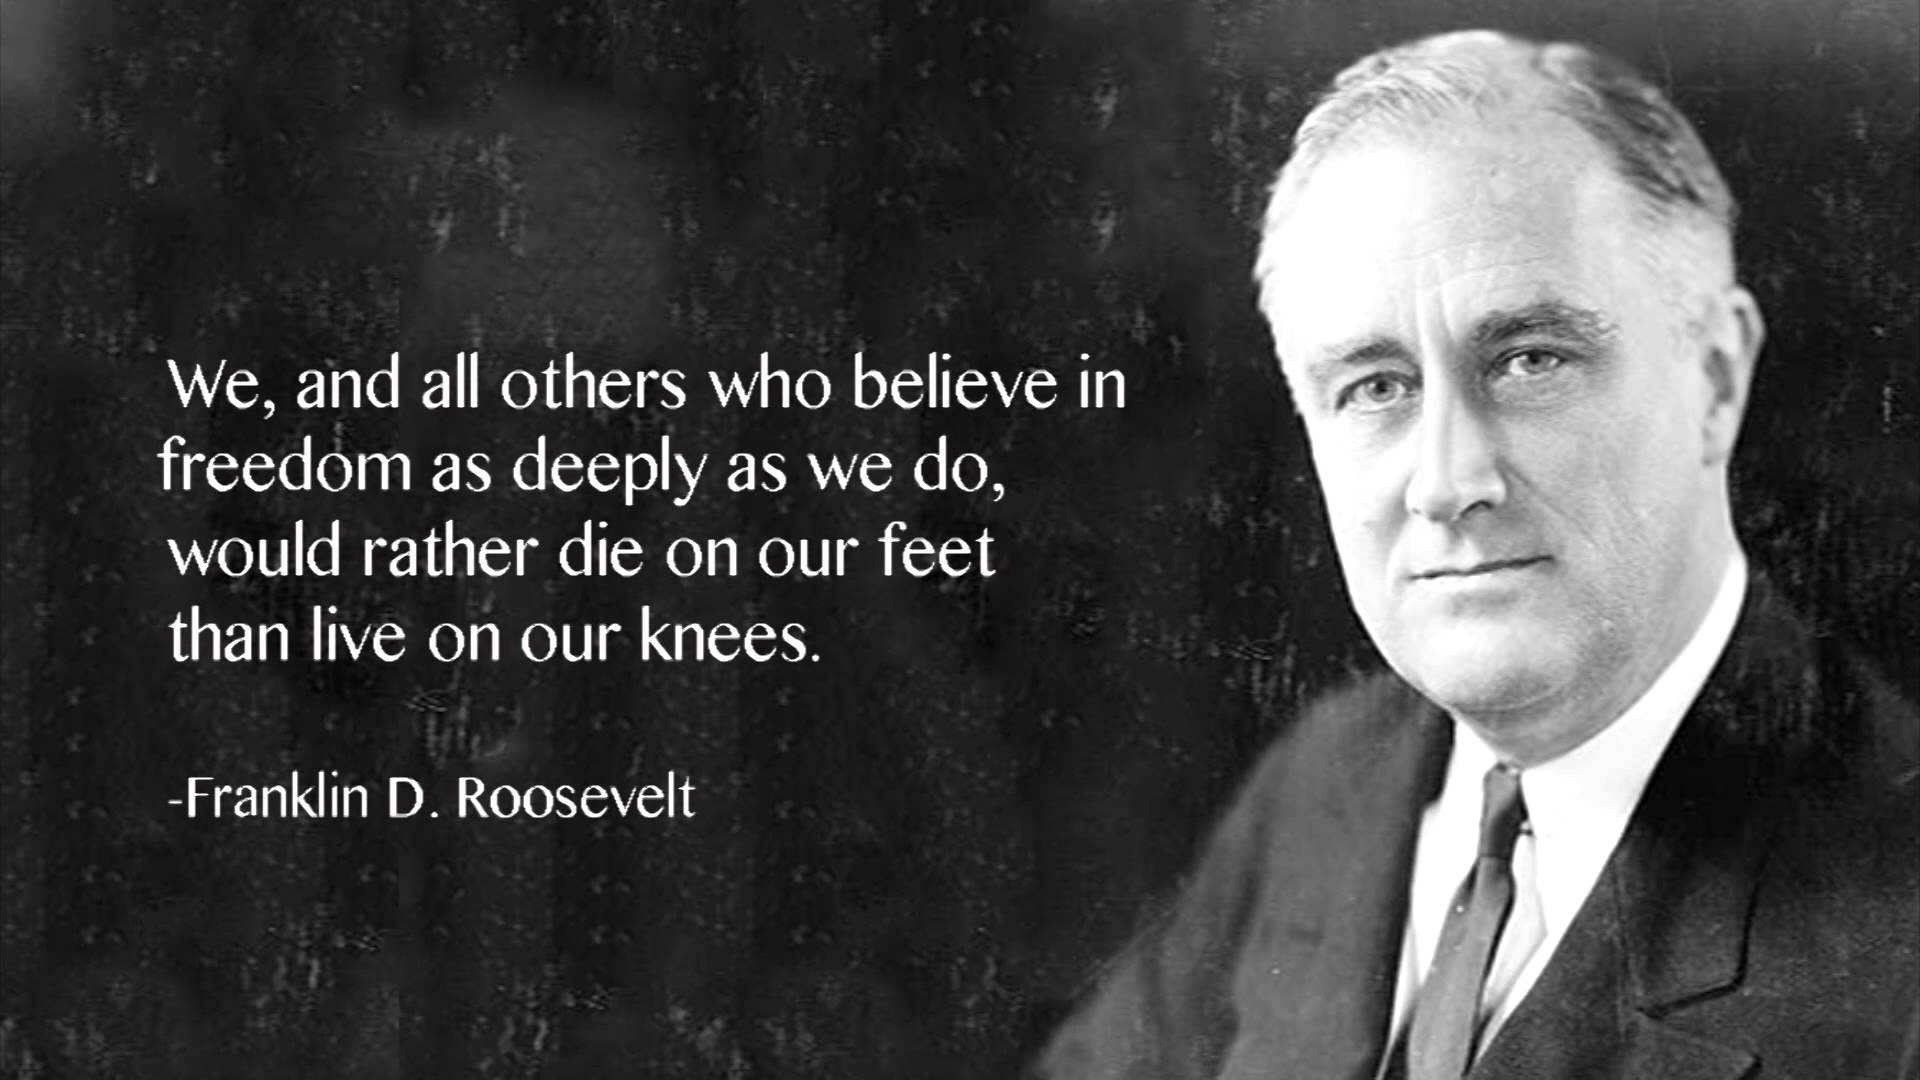 We-and-all-others-who-believe-in-freedom-as-deeply-as-we-do-would-rather-die-on-our-feet-than-live-on-our-knees.-Franklin-D.-Roosevelt.jpg